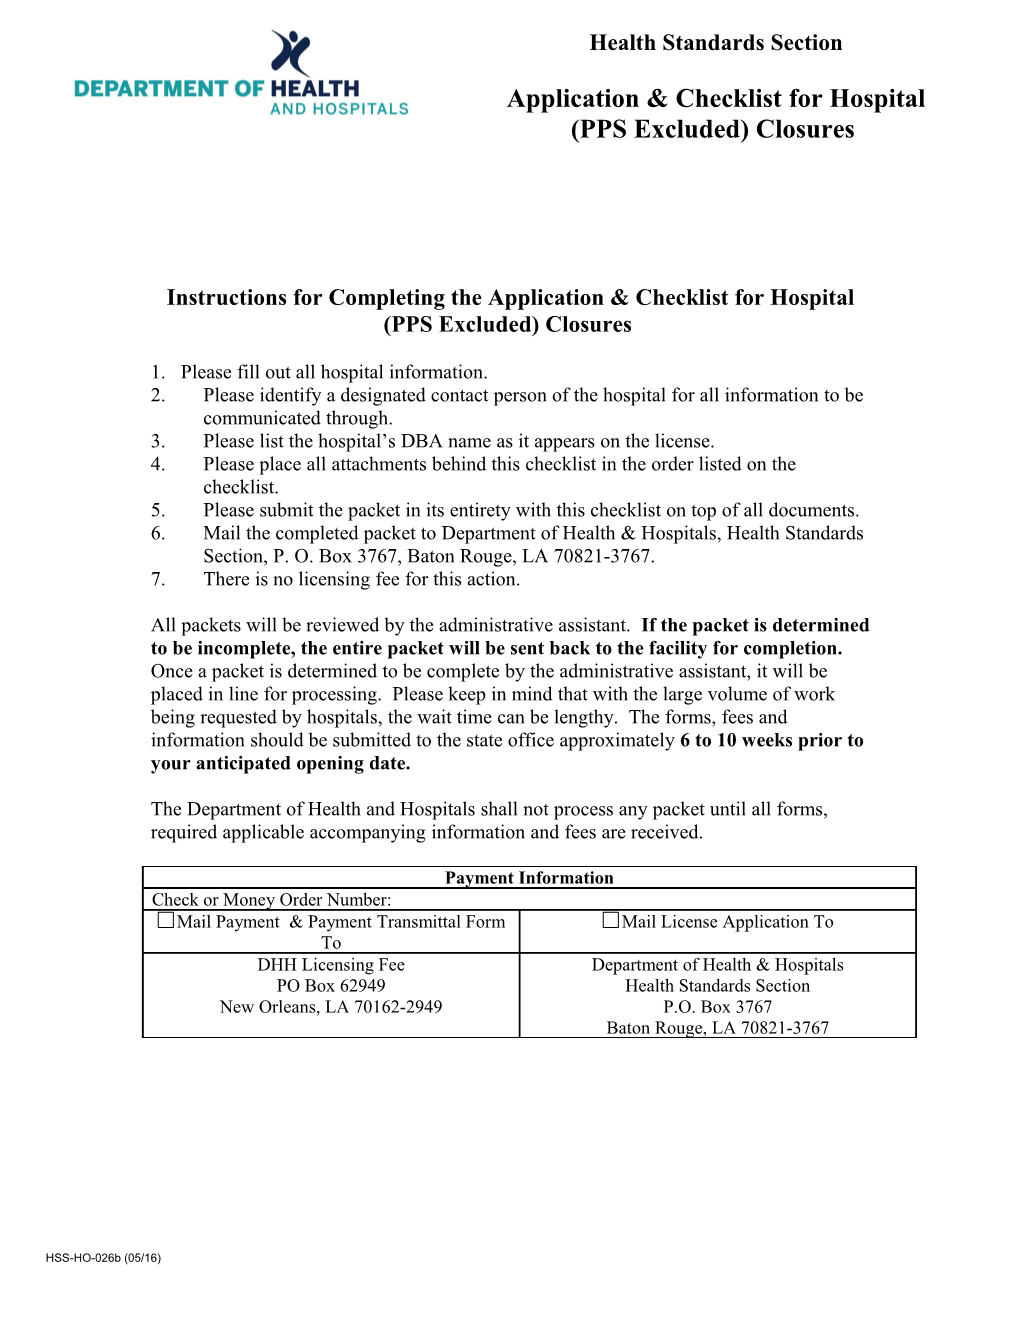 Application & Checklist for Hospital (PPS Excluded) Closures